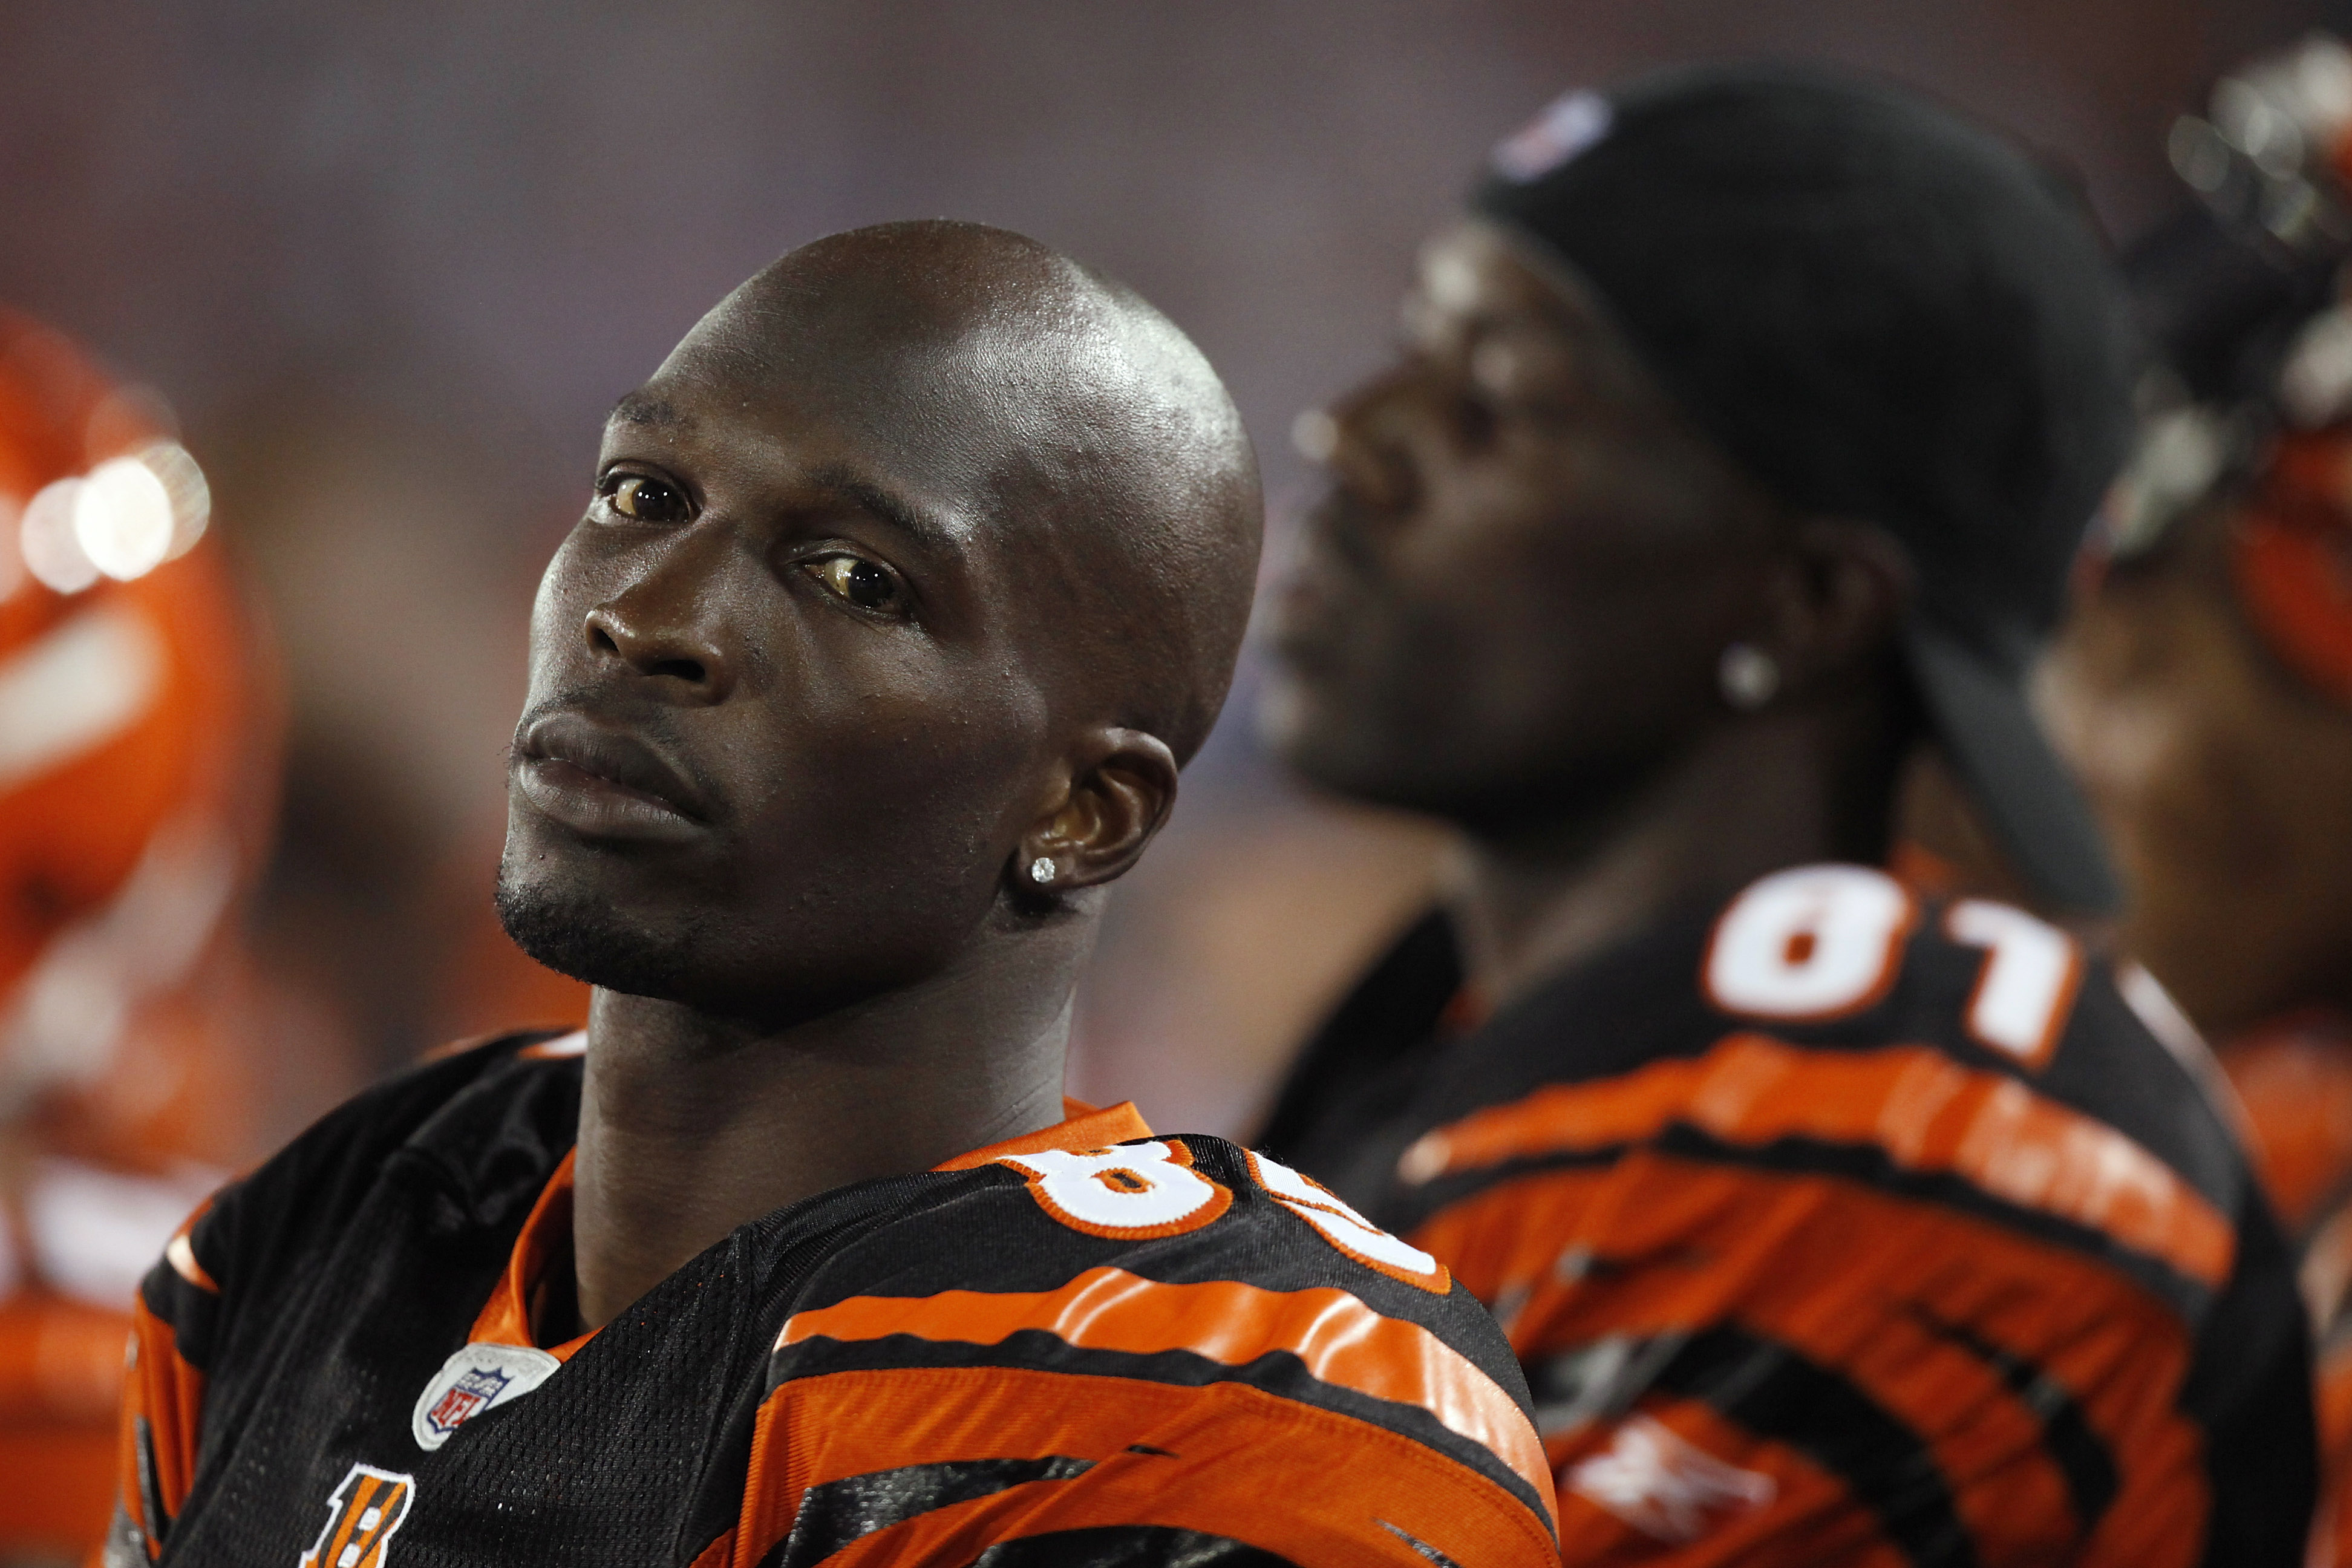 CANTON, OH - AUGUST 8: Chad Ochocinco #85 and Terrell Owens #81 of the Cincinnati Bengals look on against the Dallas Cowboys during the 2010 Pro Football Hall of Fame Game at the Pro Football Hall of Fame Field at Fawcett Stadium on August 8, 2010 in Cant